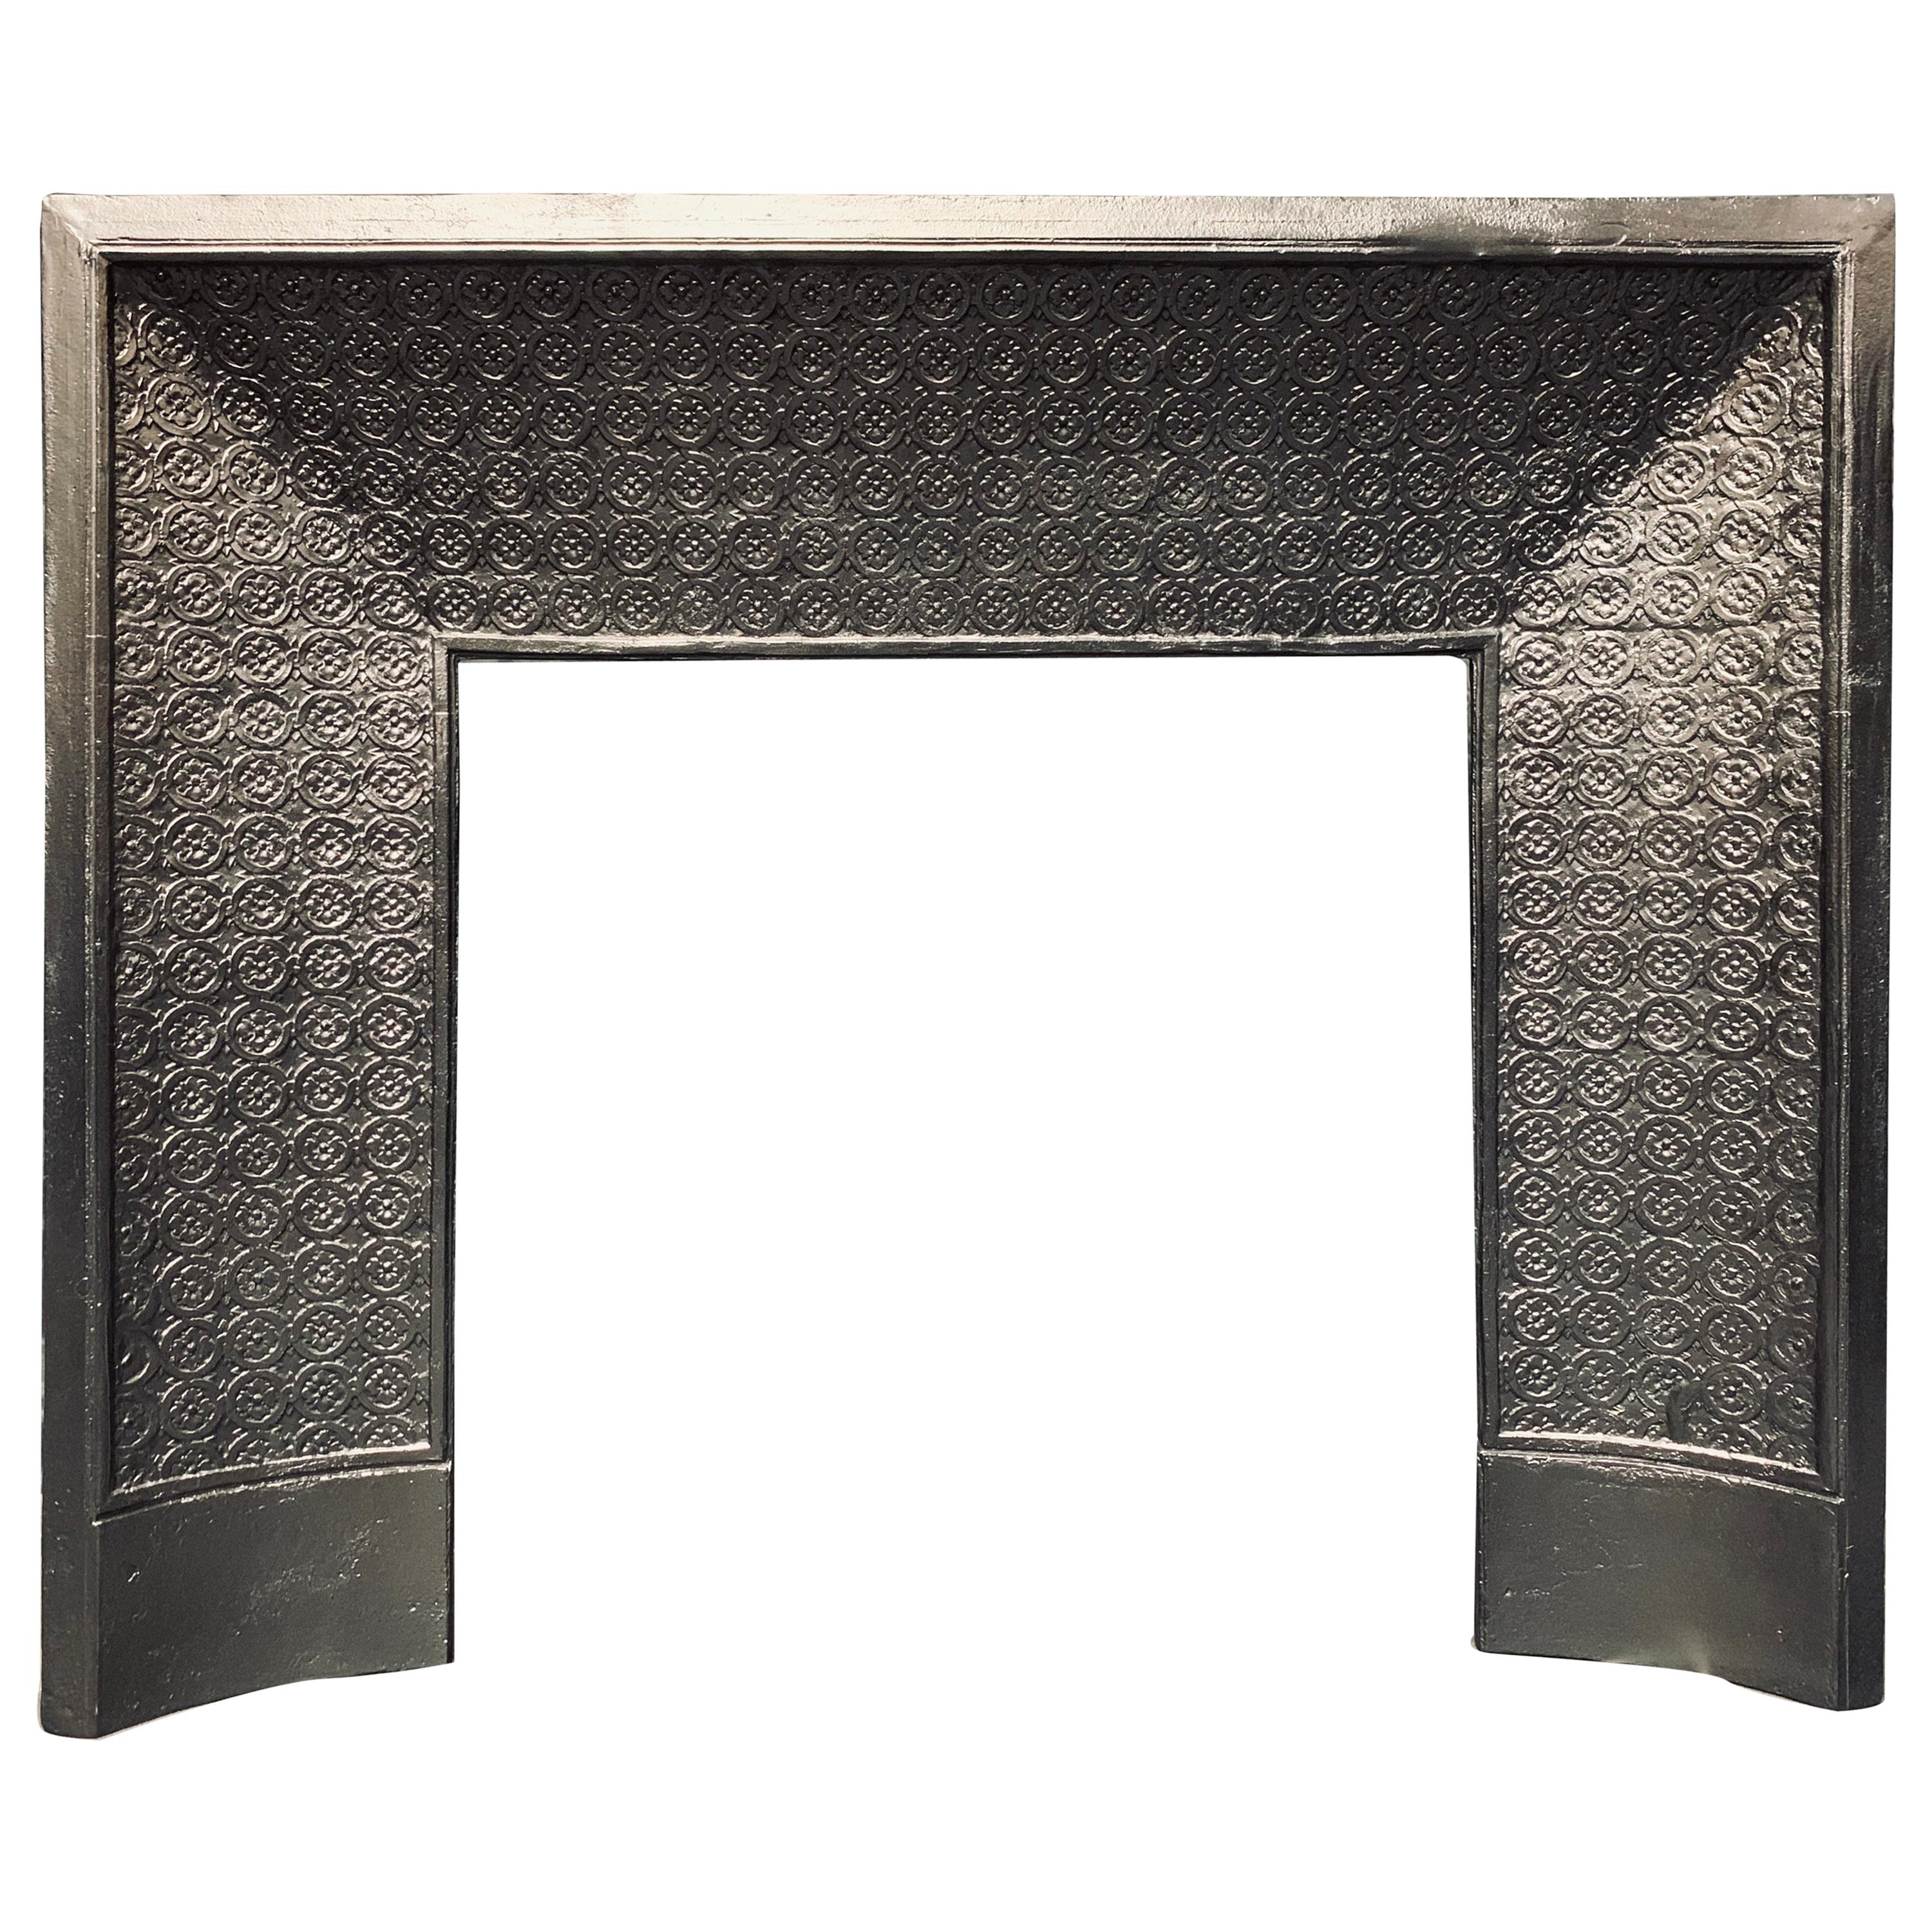 Mid-19th Century French Louis XV Cast Iron Fireplace Insert